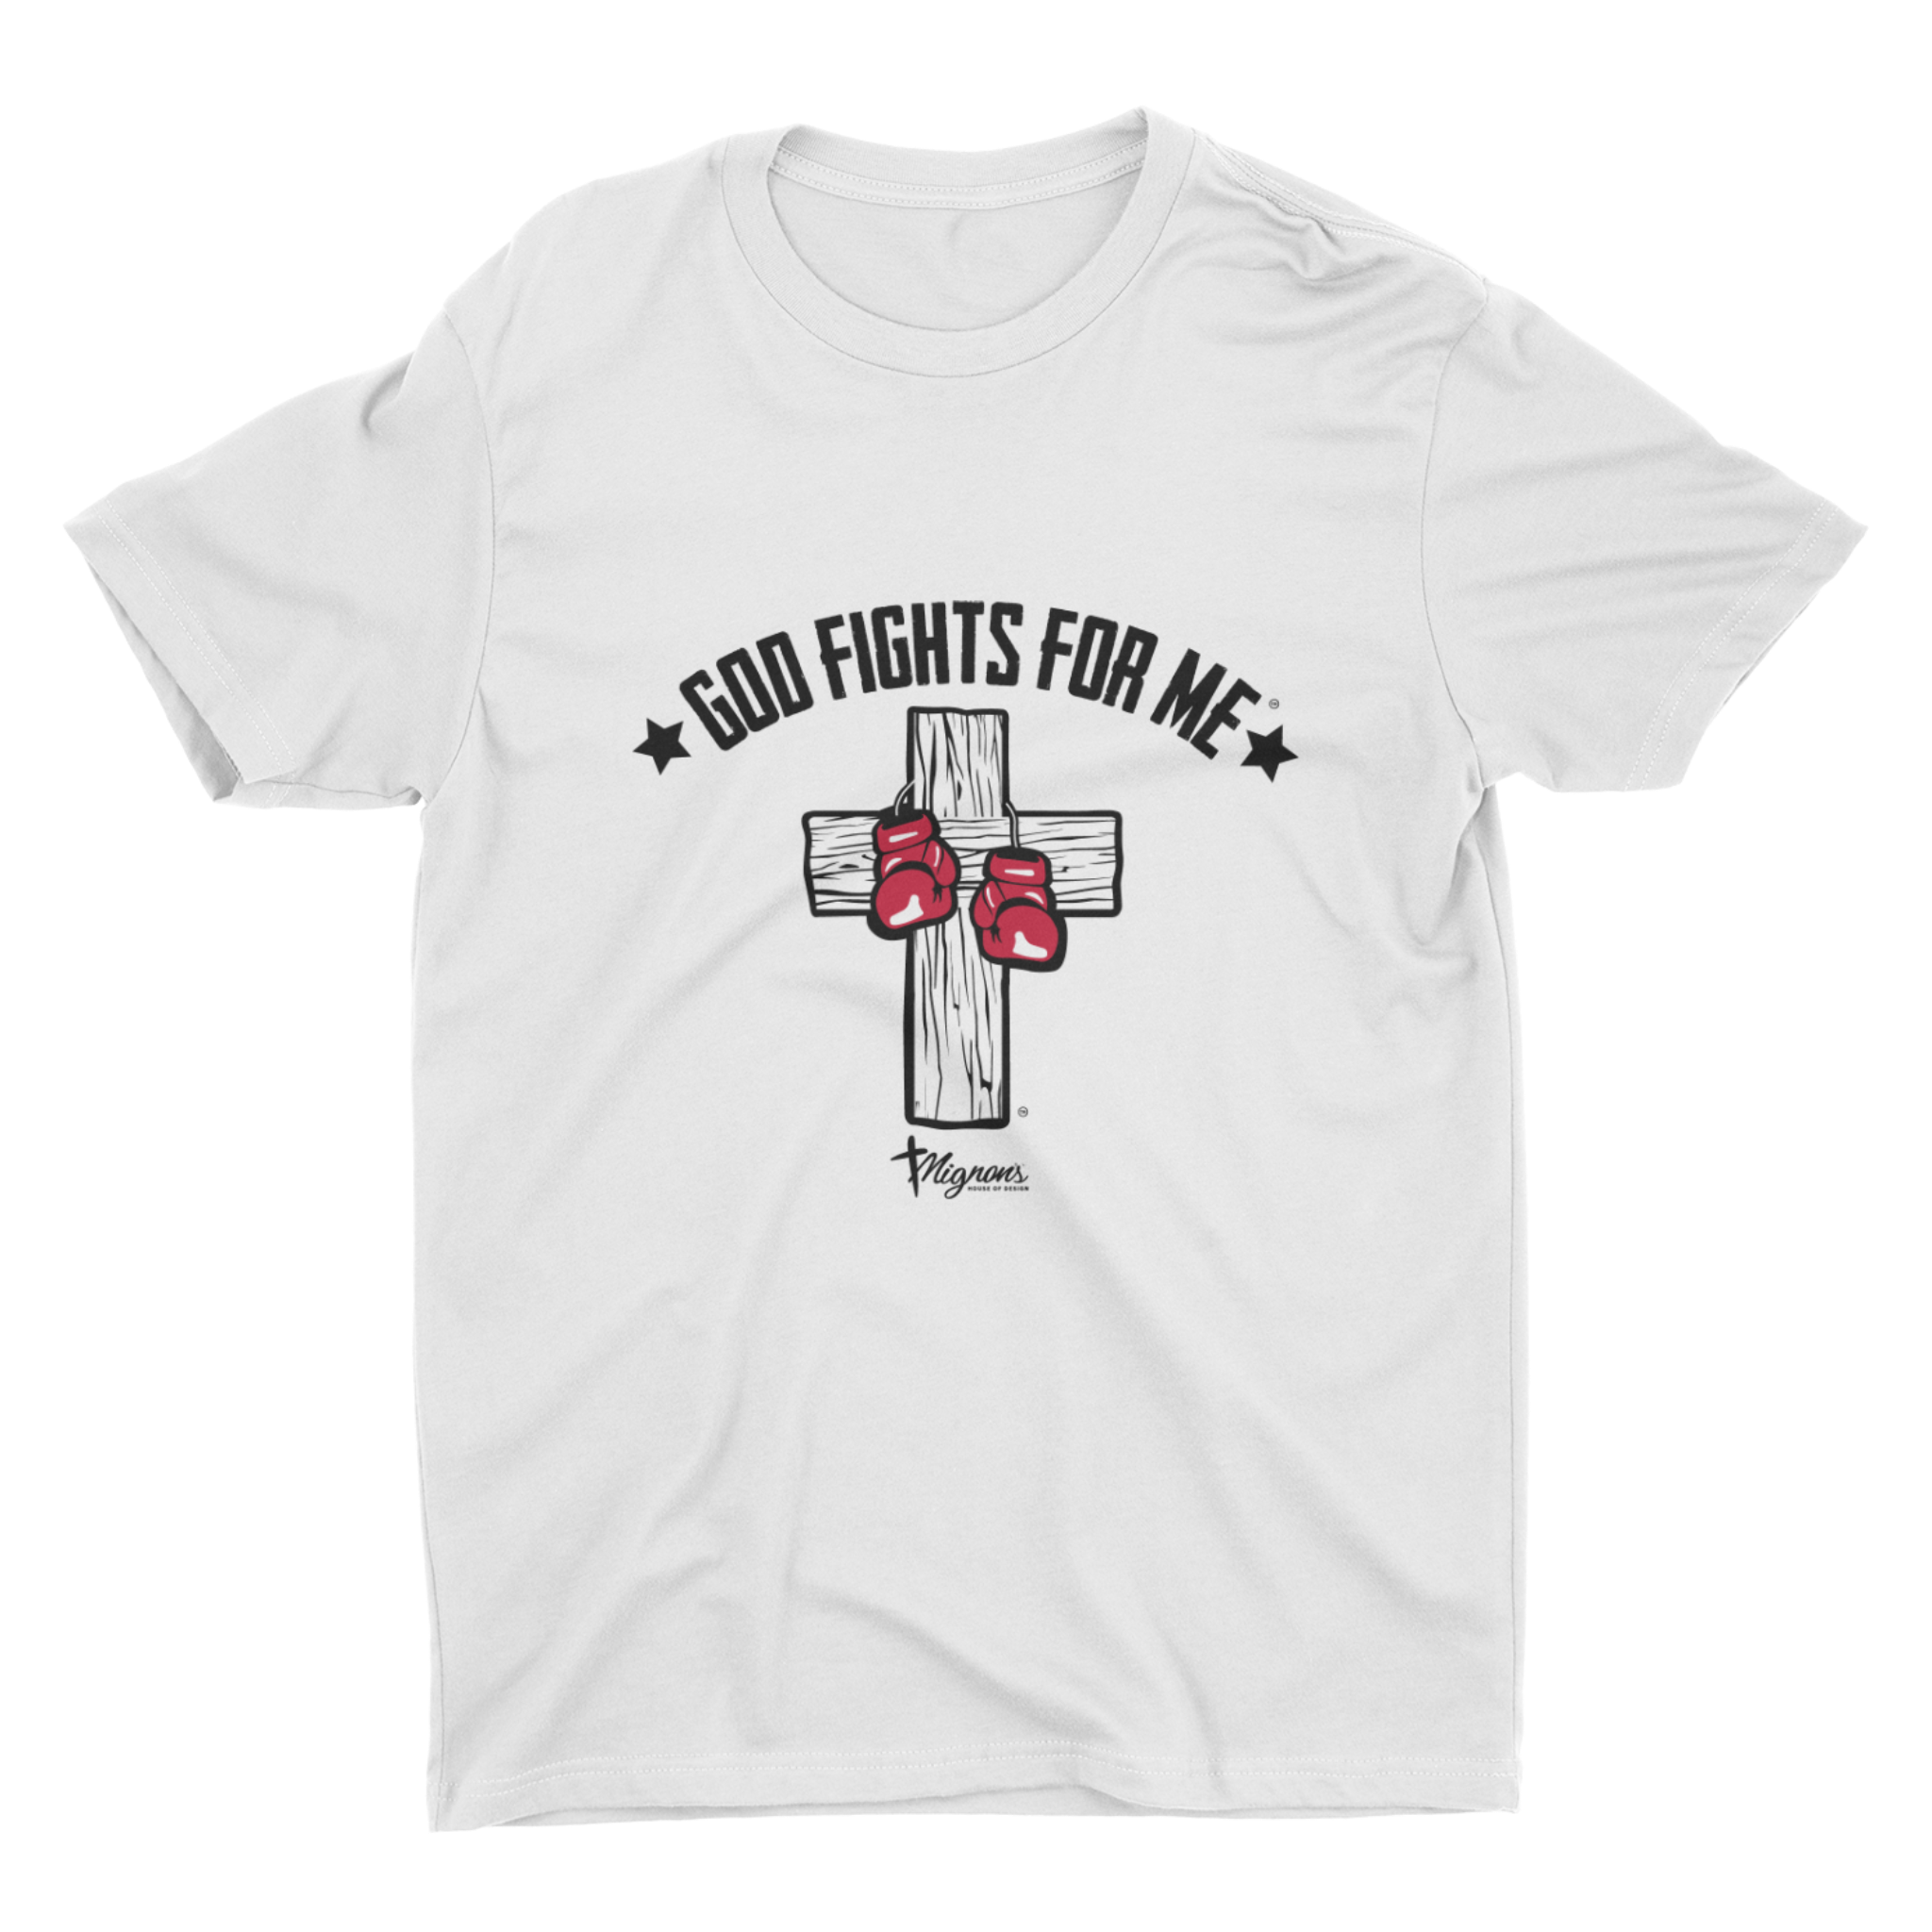 White "God Fights For Me" Unisex Tee